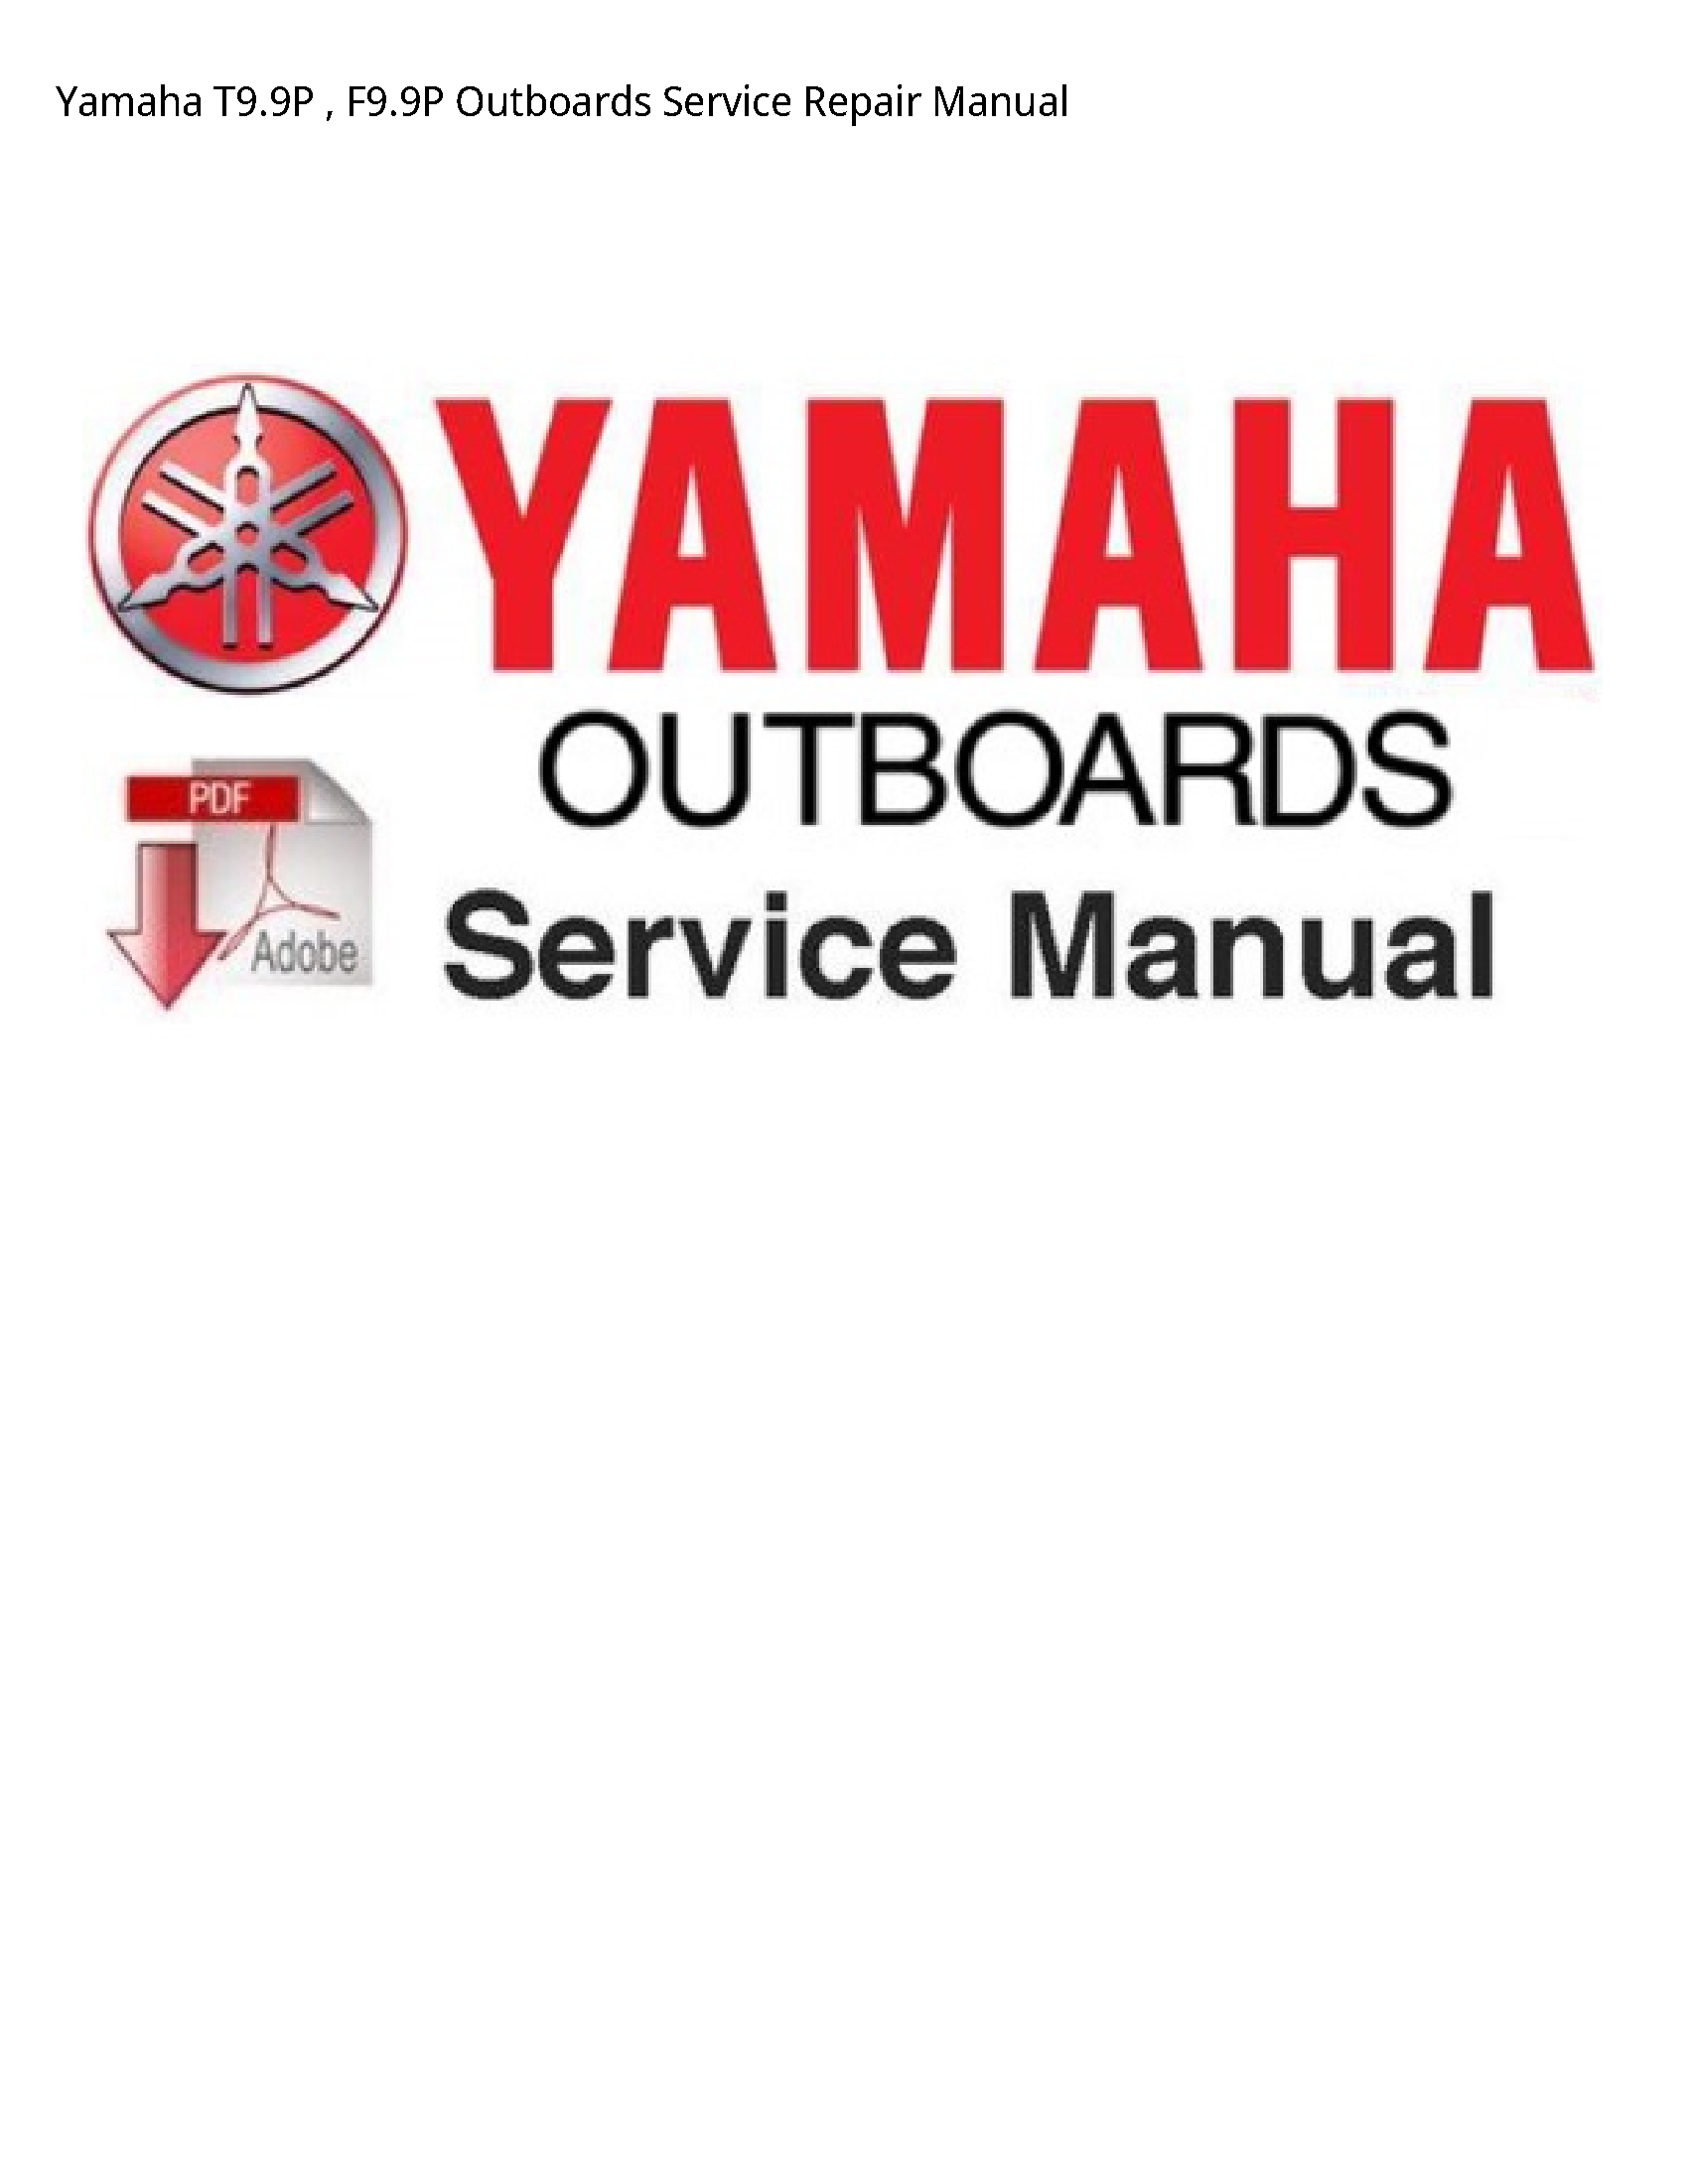 Yamaha T9.9P Outboards manual